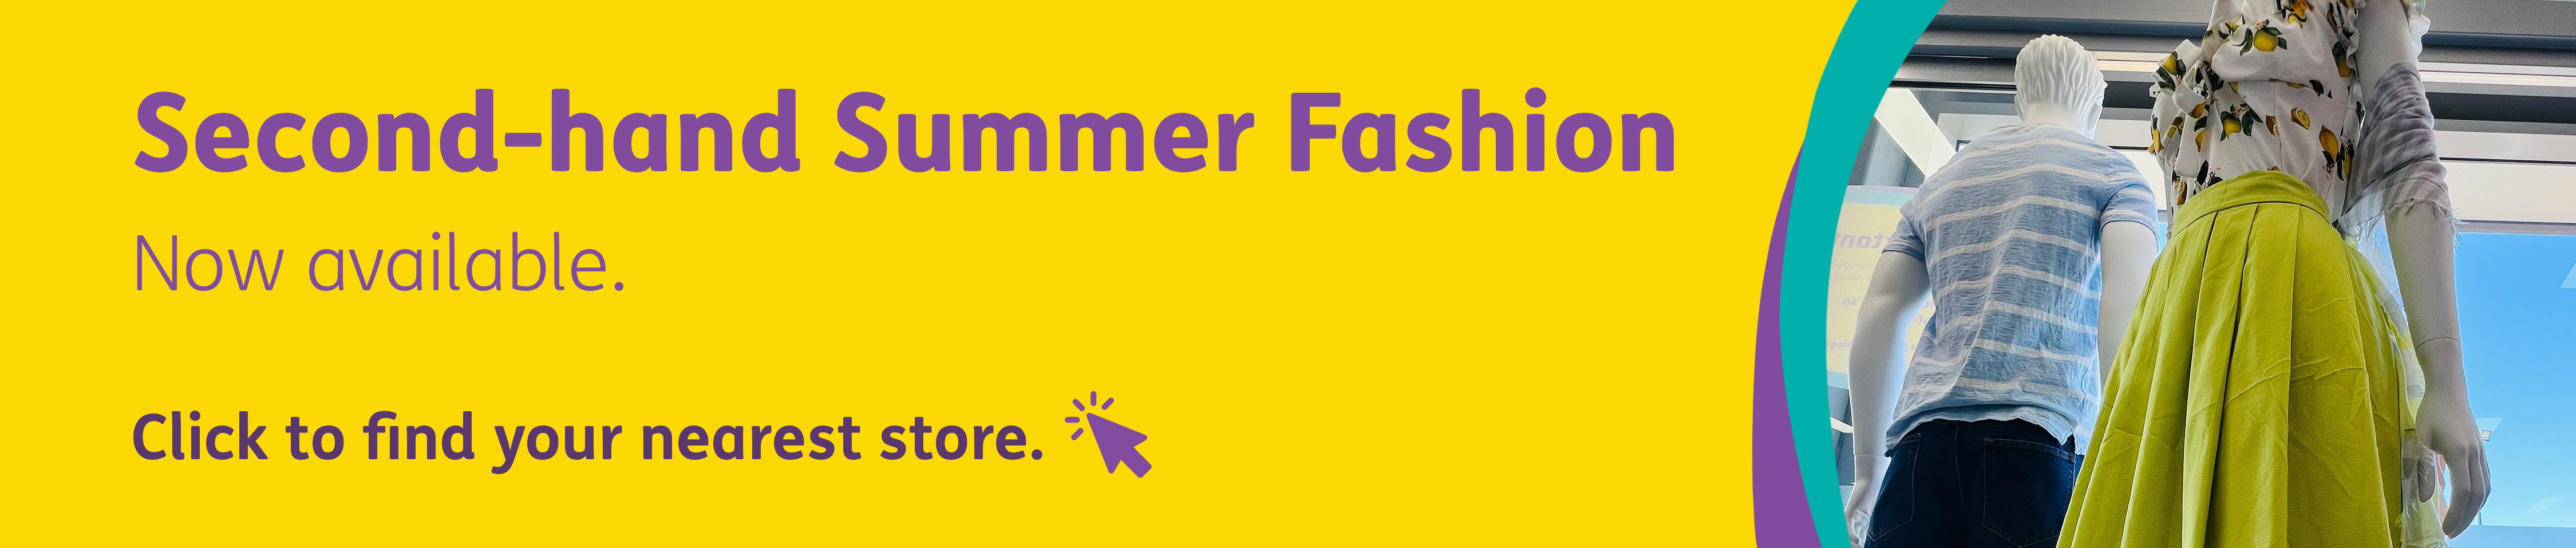 Second-hand Summer Fashion. Now Available. Click to find your nearest store.